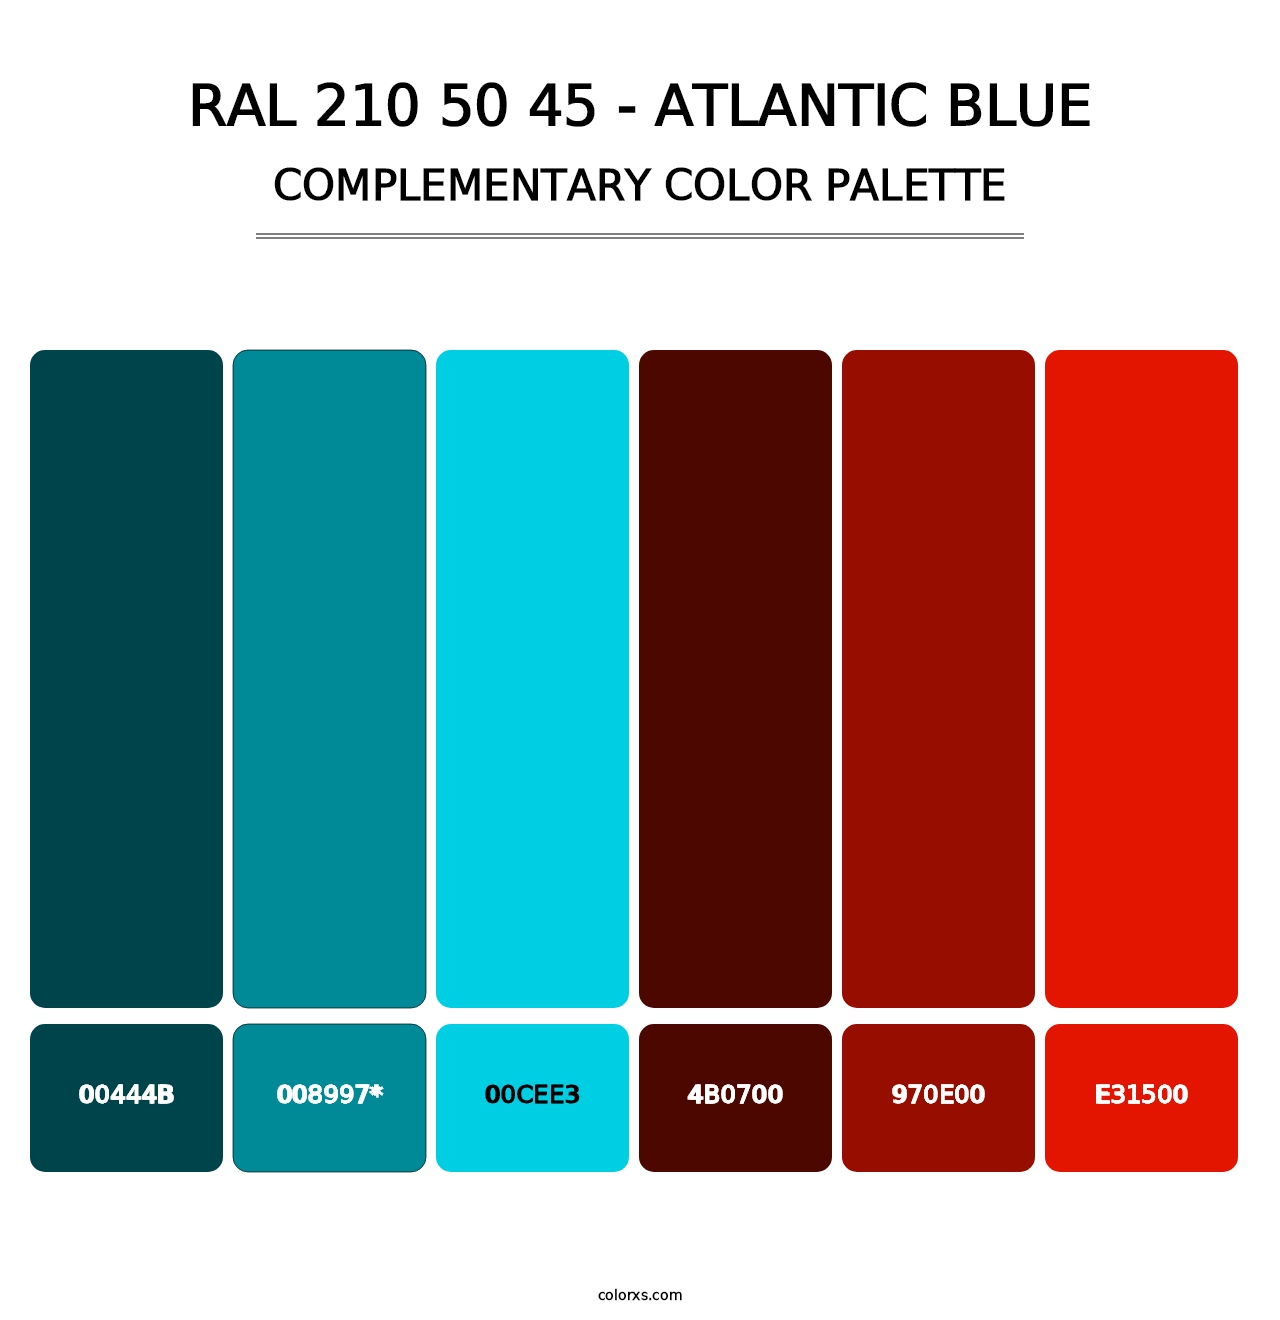 RAL 210 50 45 - Atlantic Blue - Complementary Color Palette